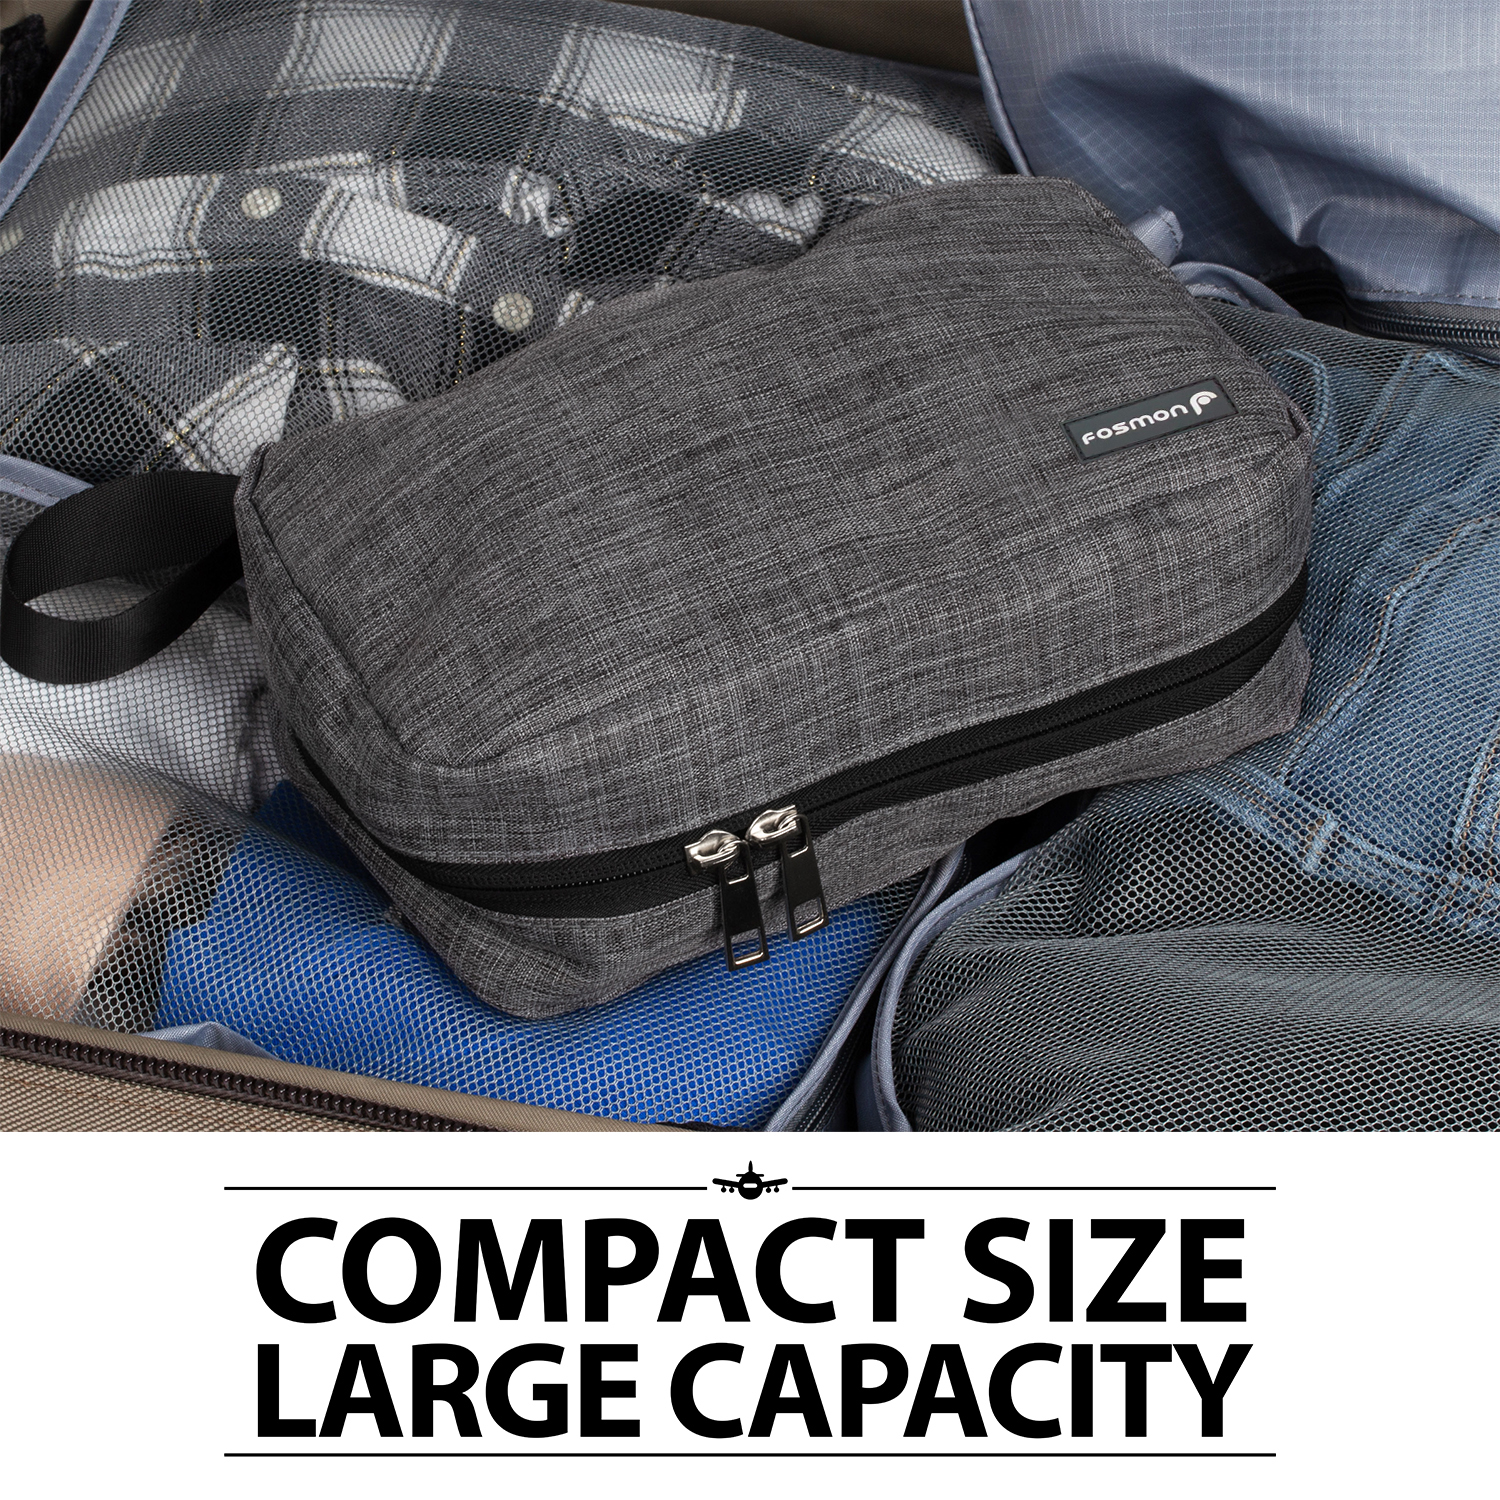 Fosmon Large Capacity Hanging Toiletry Bag, Portable Toiletries Travel Organizer Bag with 3 Compartments, 3 Pockets & 1 Sturdy Hook Accessory for Men and Women [GRAY] - image 4 of 7